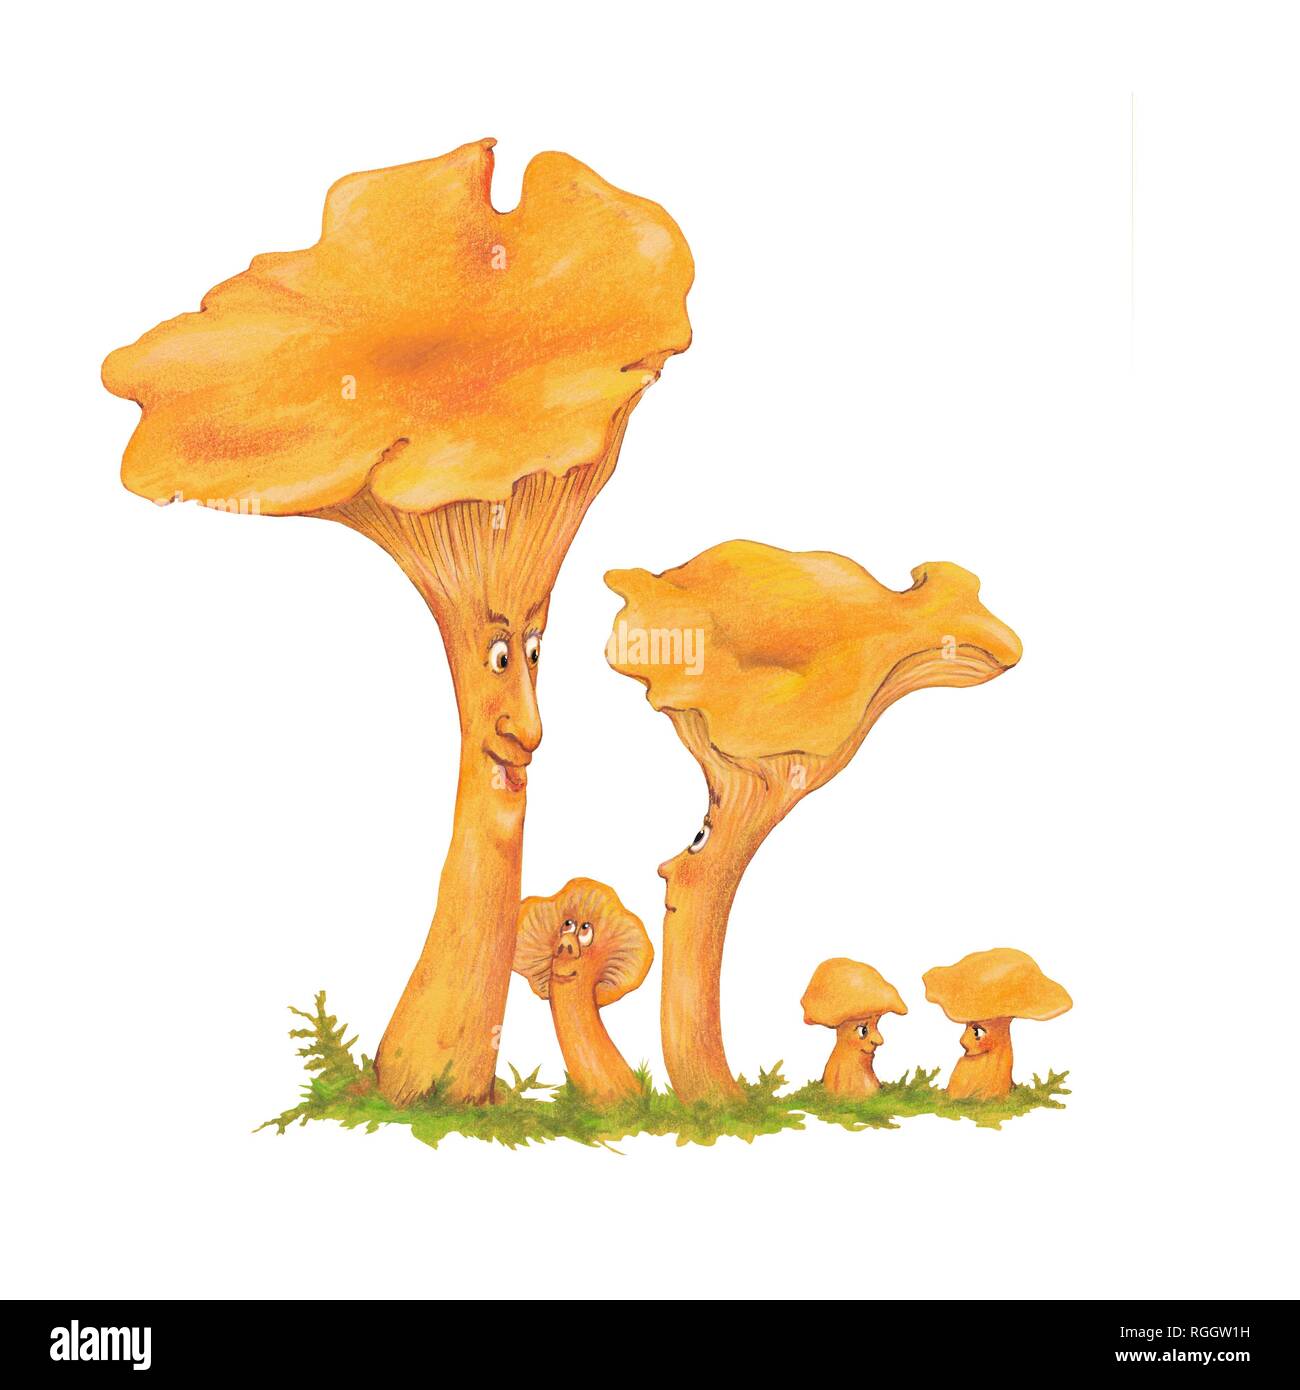 Chanterelles (Cantharellus), family, father, mother, children, clipping, background white, Germany Stock Photo